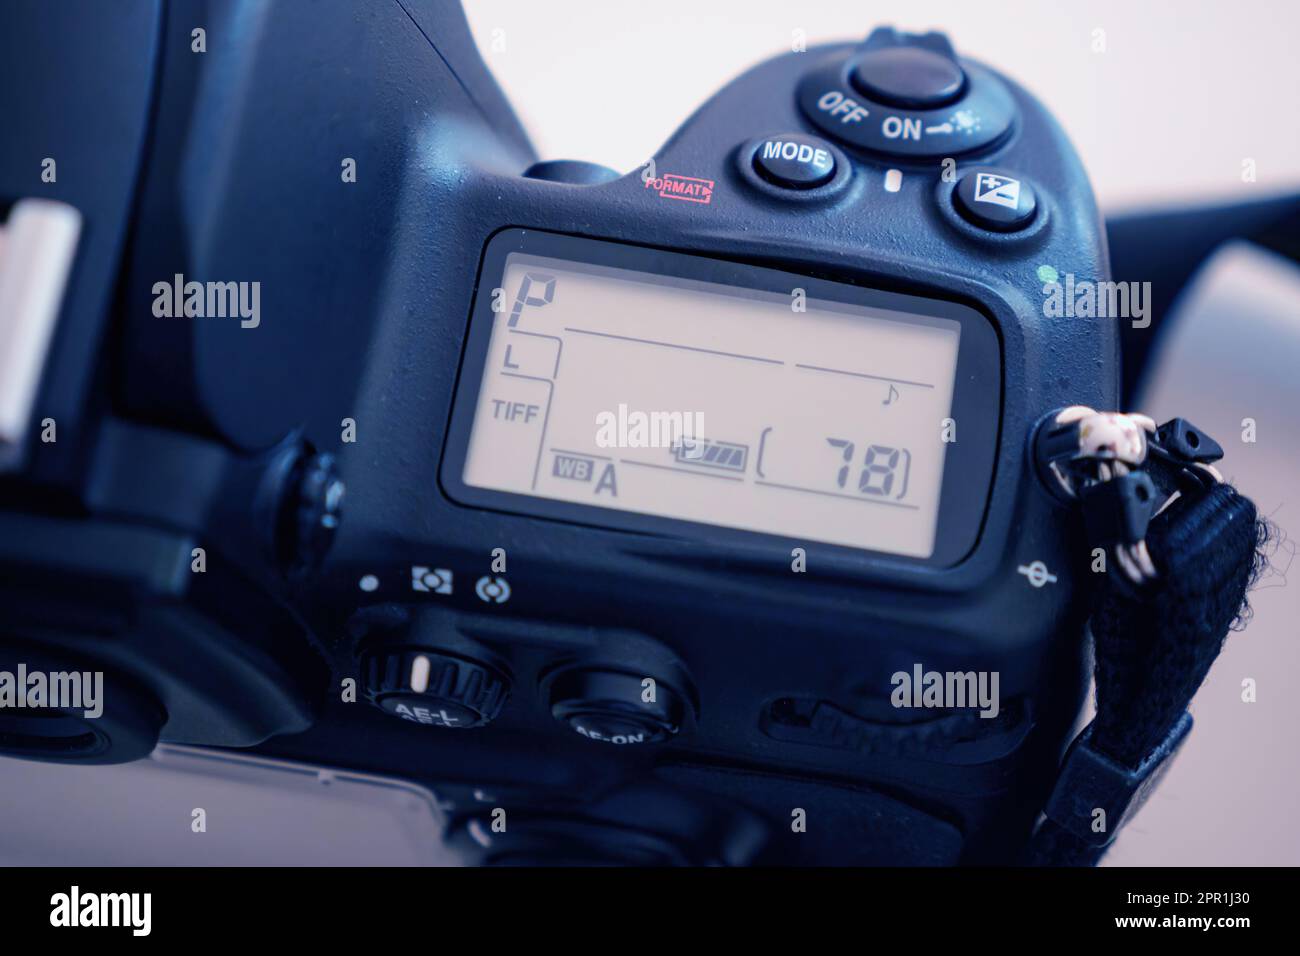 Paris, France - Jul 10, 2015: This professional Nikon camera features a  bright LCD display, mode buttons and battery sign for easy operation. Tiff  format archive technology for perfect images Stock Photo - Alamy